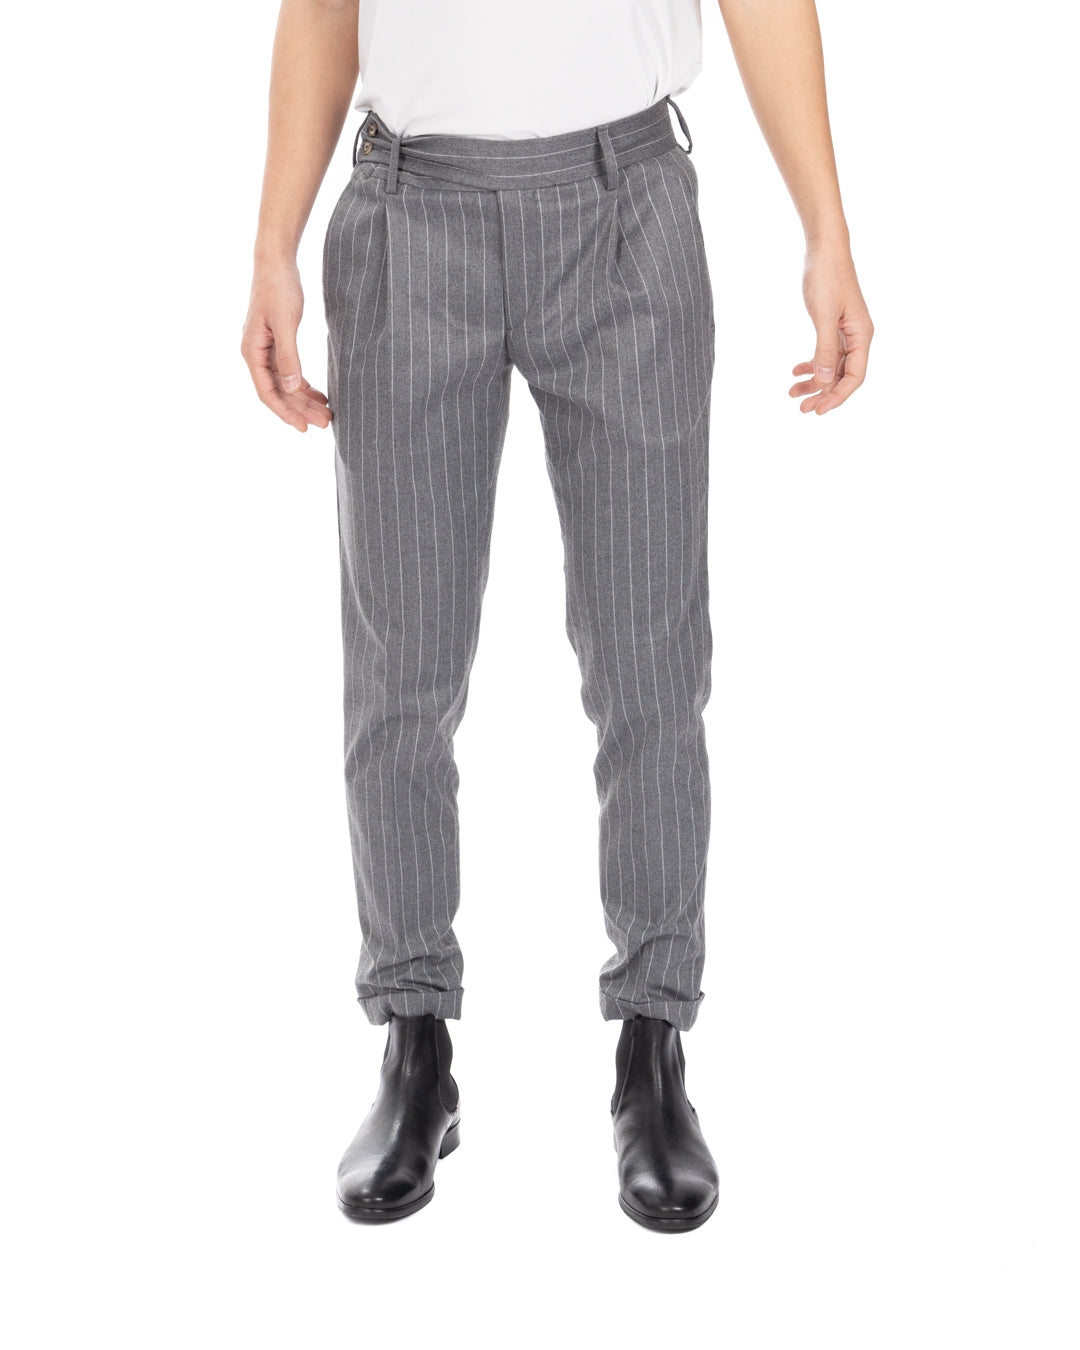 Italian - gray pinstriped high-waisted trousers